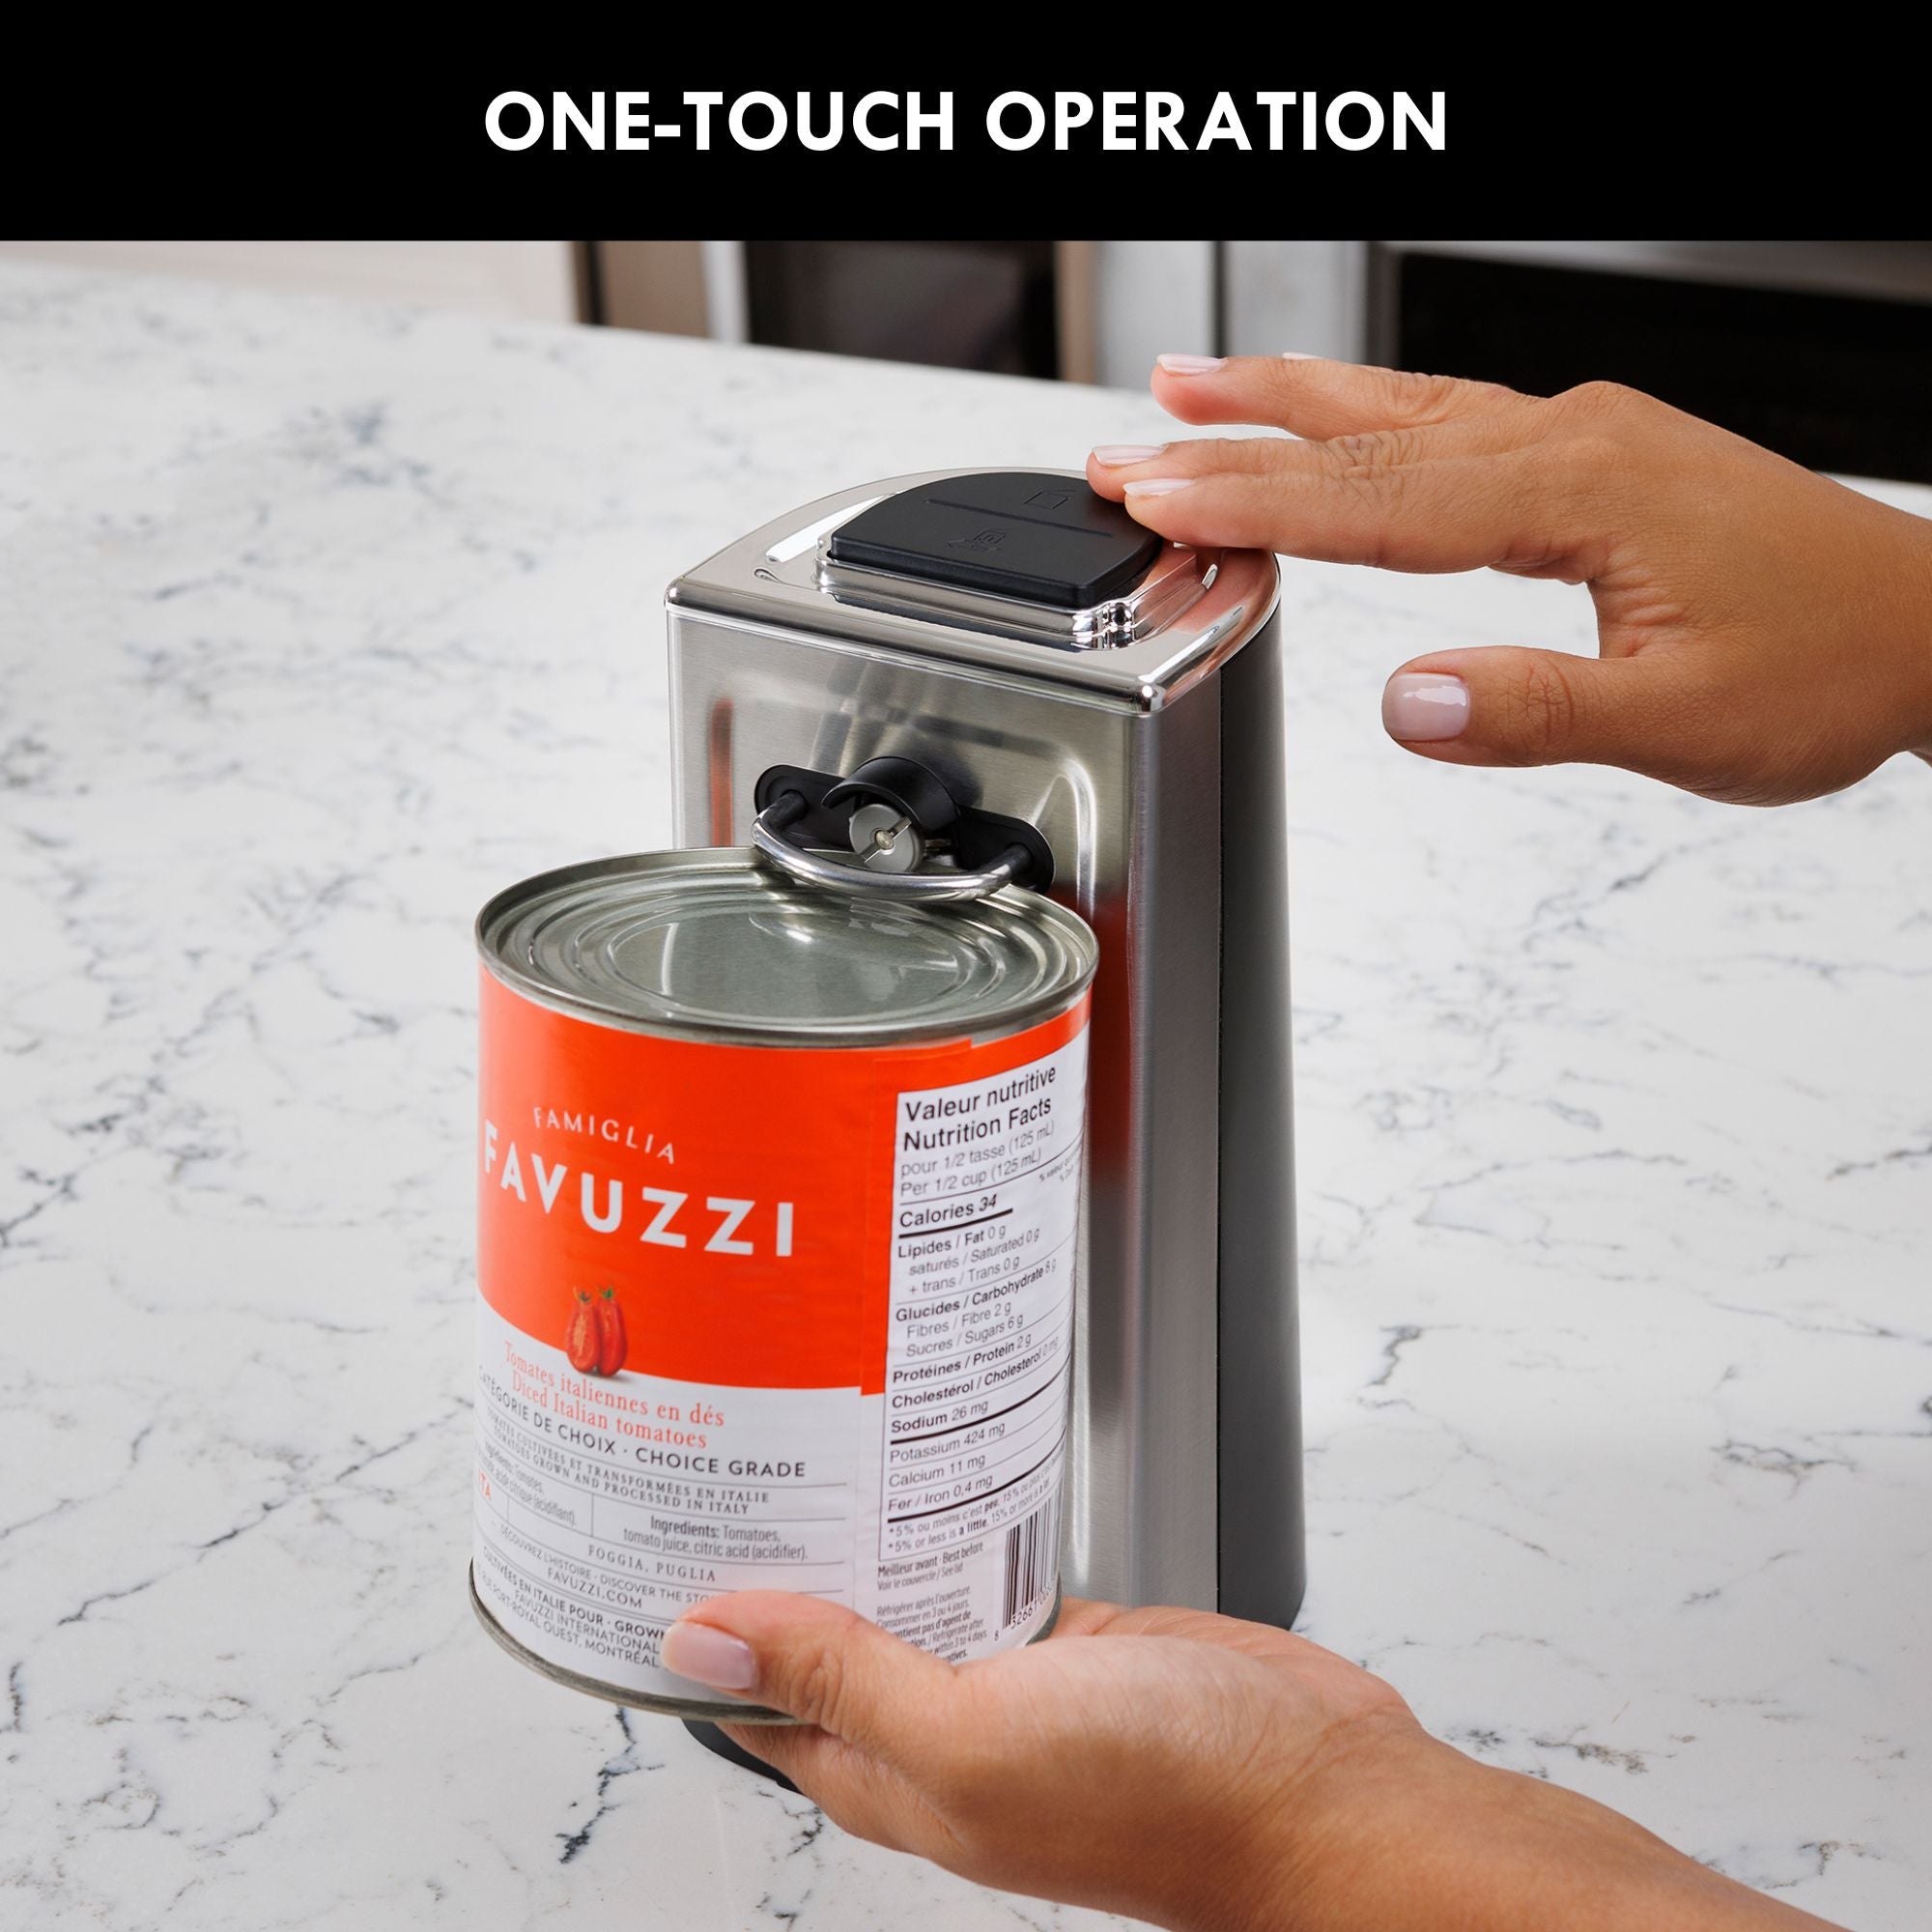 A person's hands holding a can and pressing the button on top of the Kenmore smooth-edge can opener on a white marble kitchen counter. Text above reads, "One-touch operation"